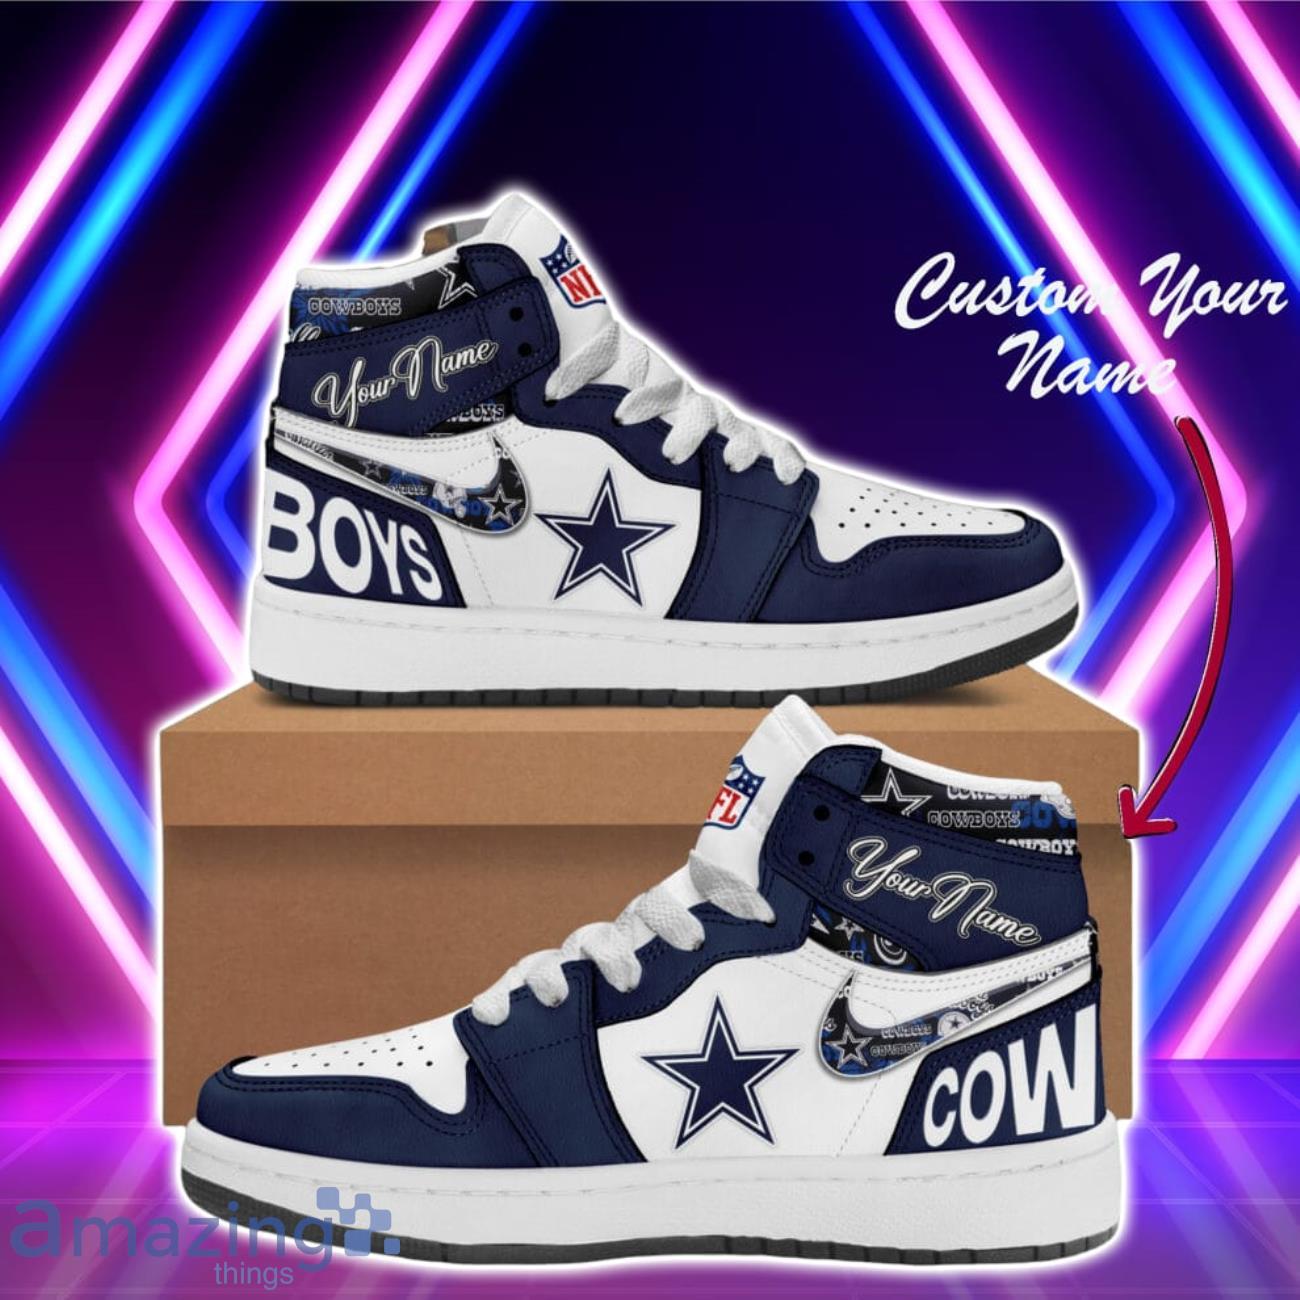 Dallas Cowboys NFL Air Jordan High Top Fashionable Sneakers For Sport Fans Custom Name Product Photo 1